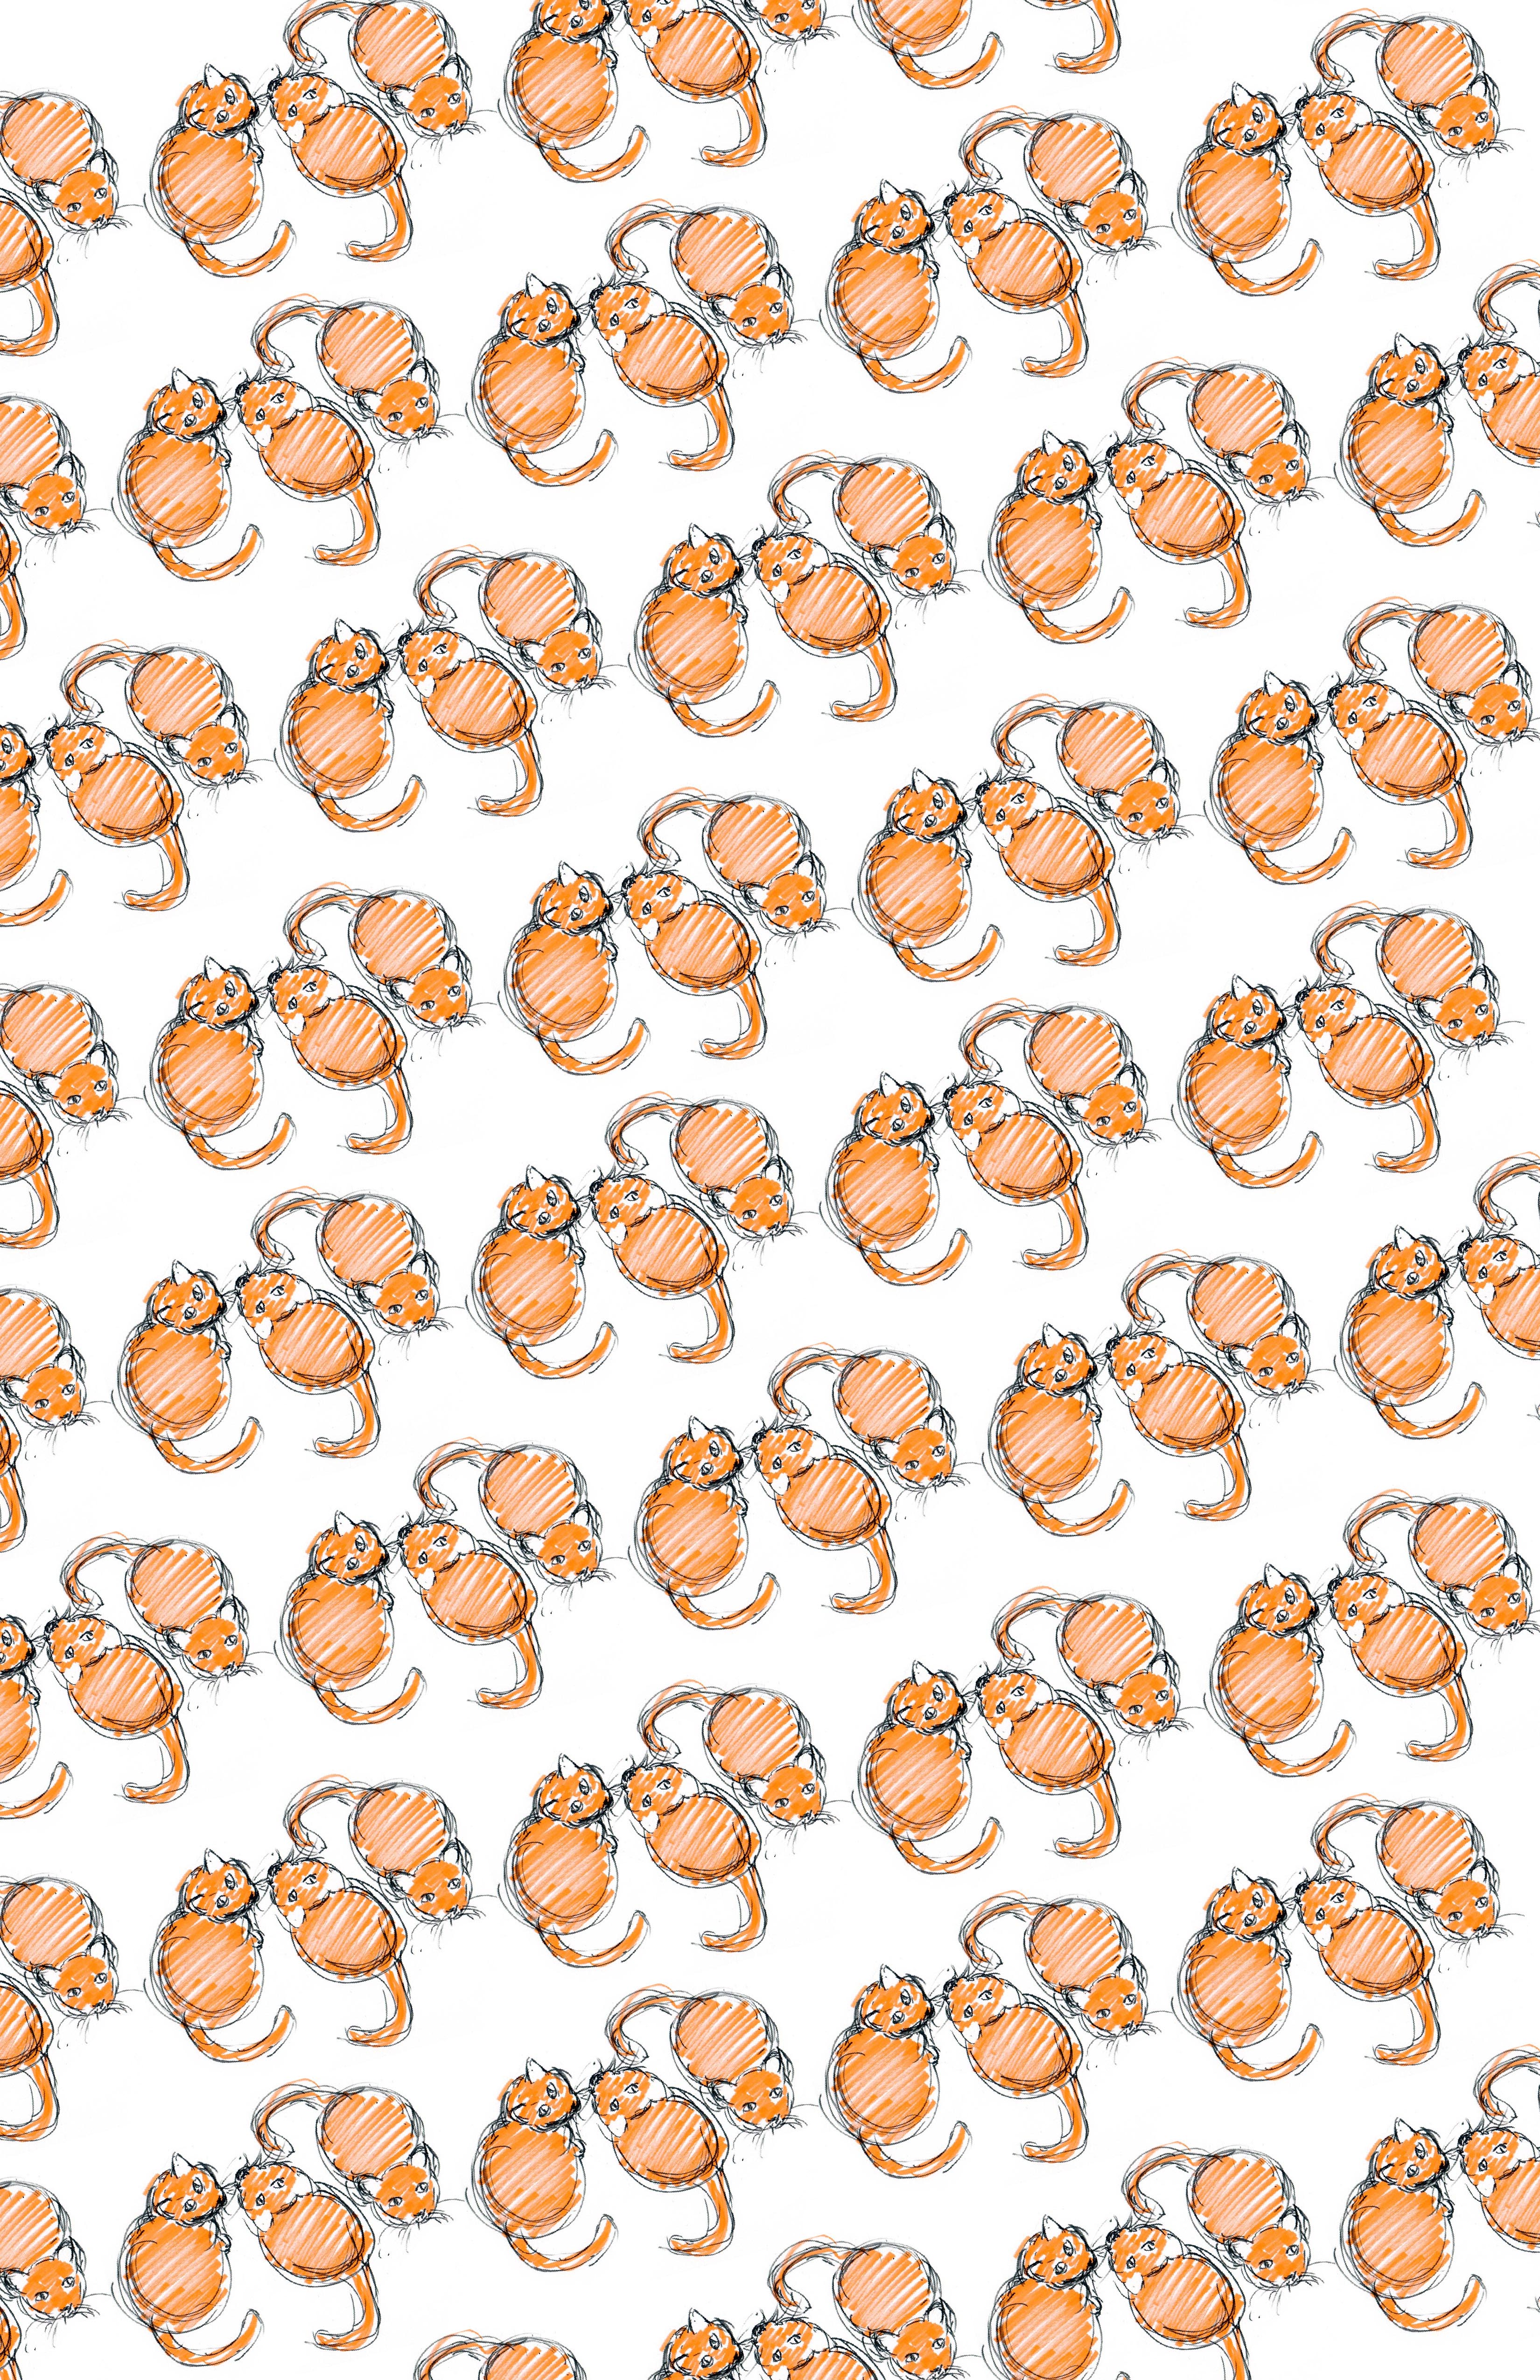 Three Orange Cats wrapping paper.